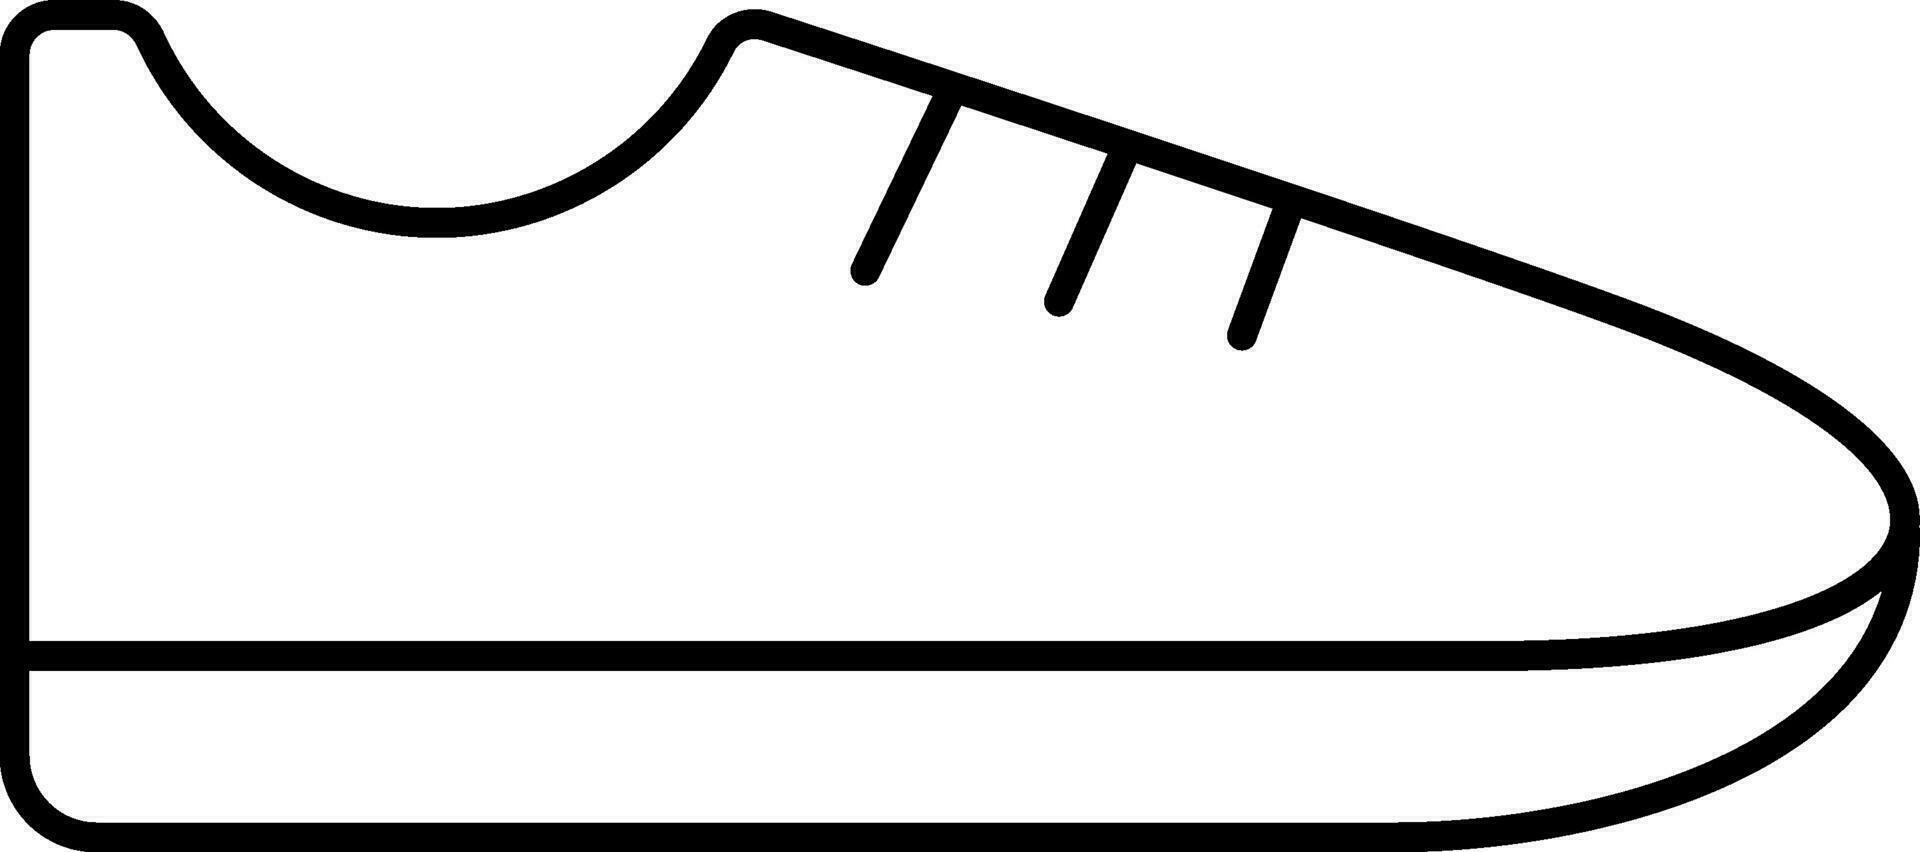 Black line art illustration of Shoes icon. vector